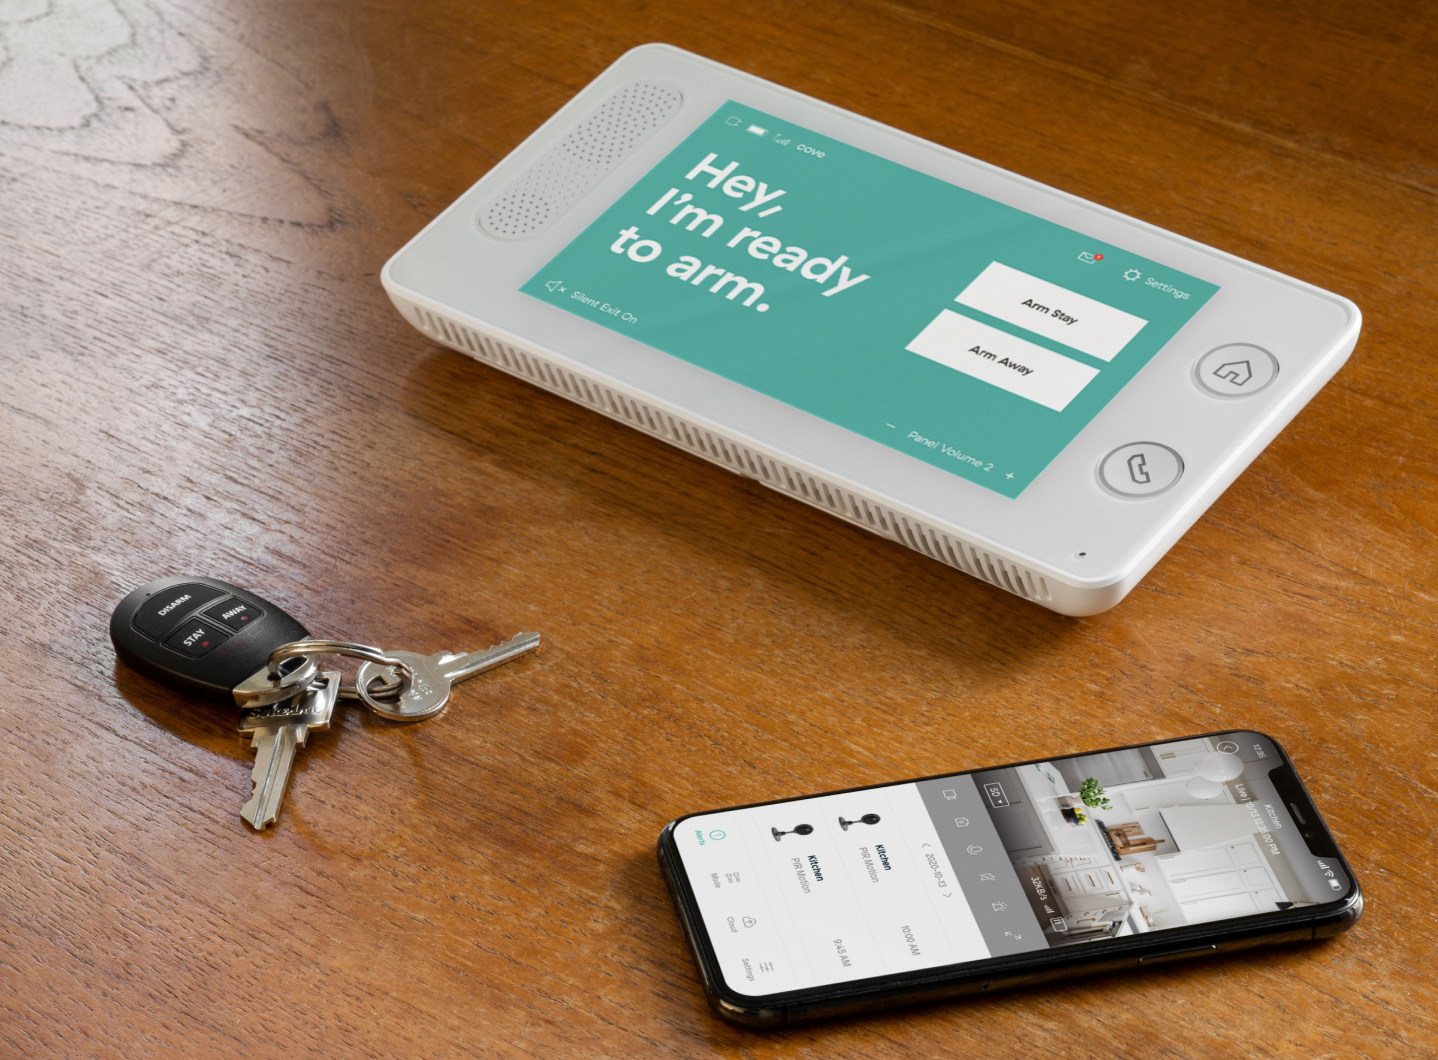 Cove home security panel, keys, and phone.